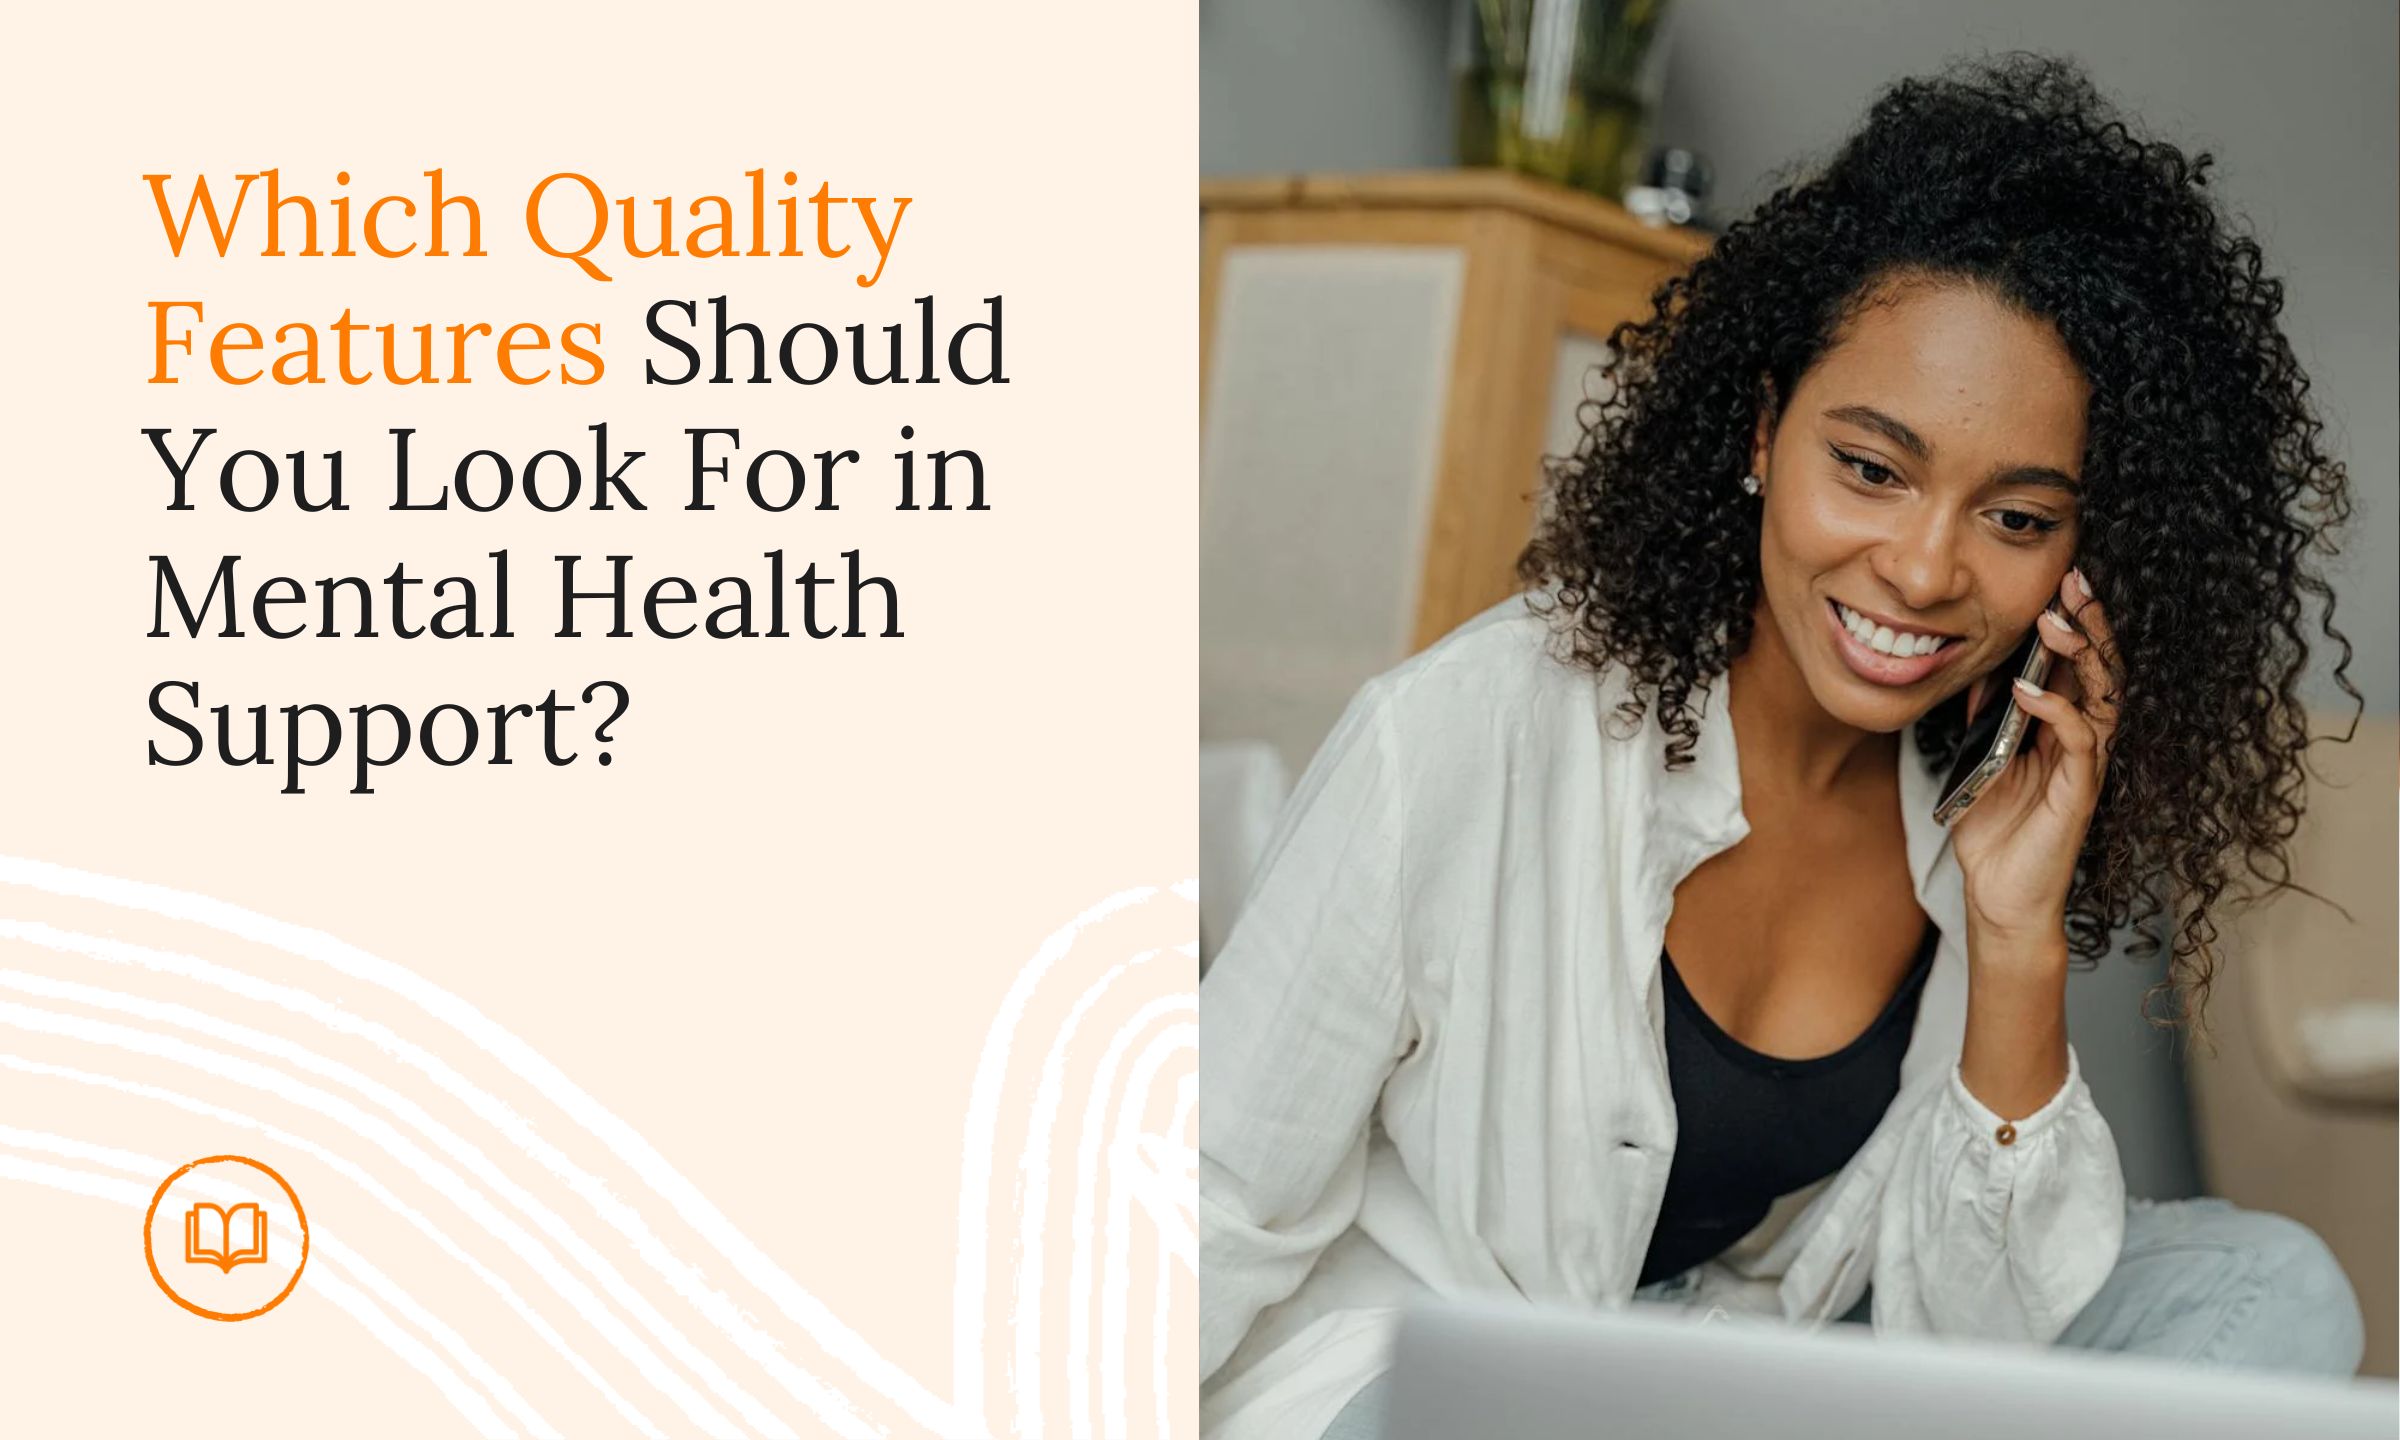 Which Quality Features Should You Look For in Mental Health Support?